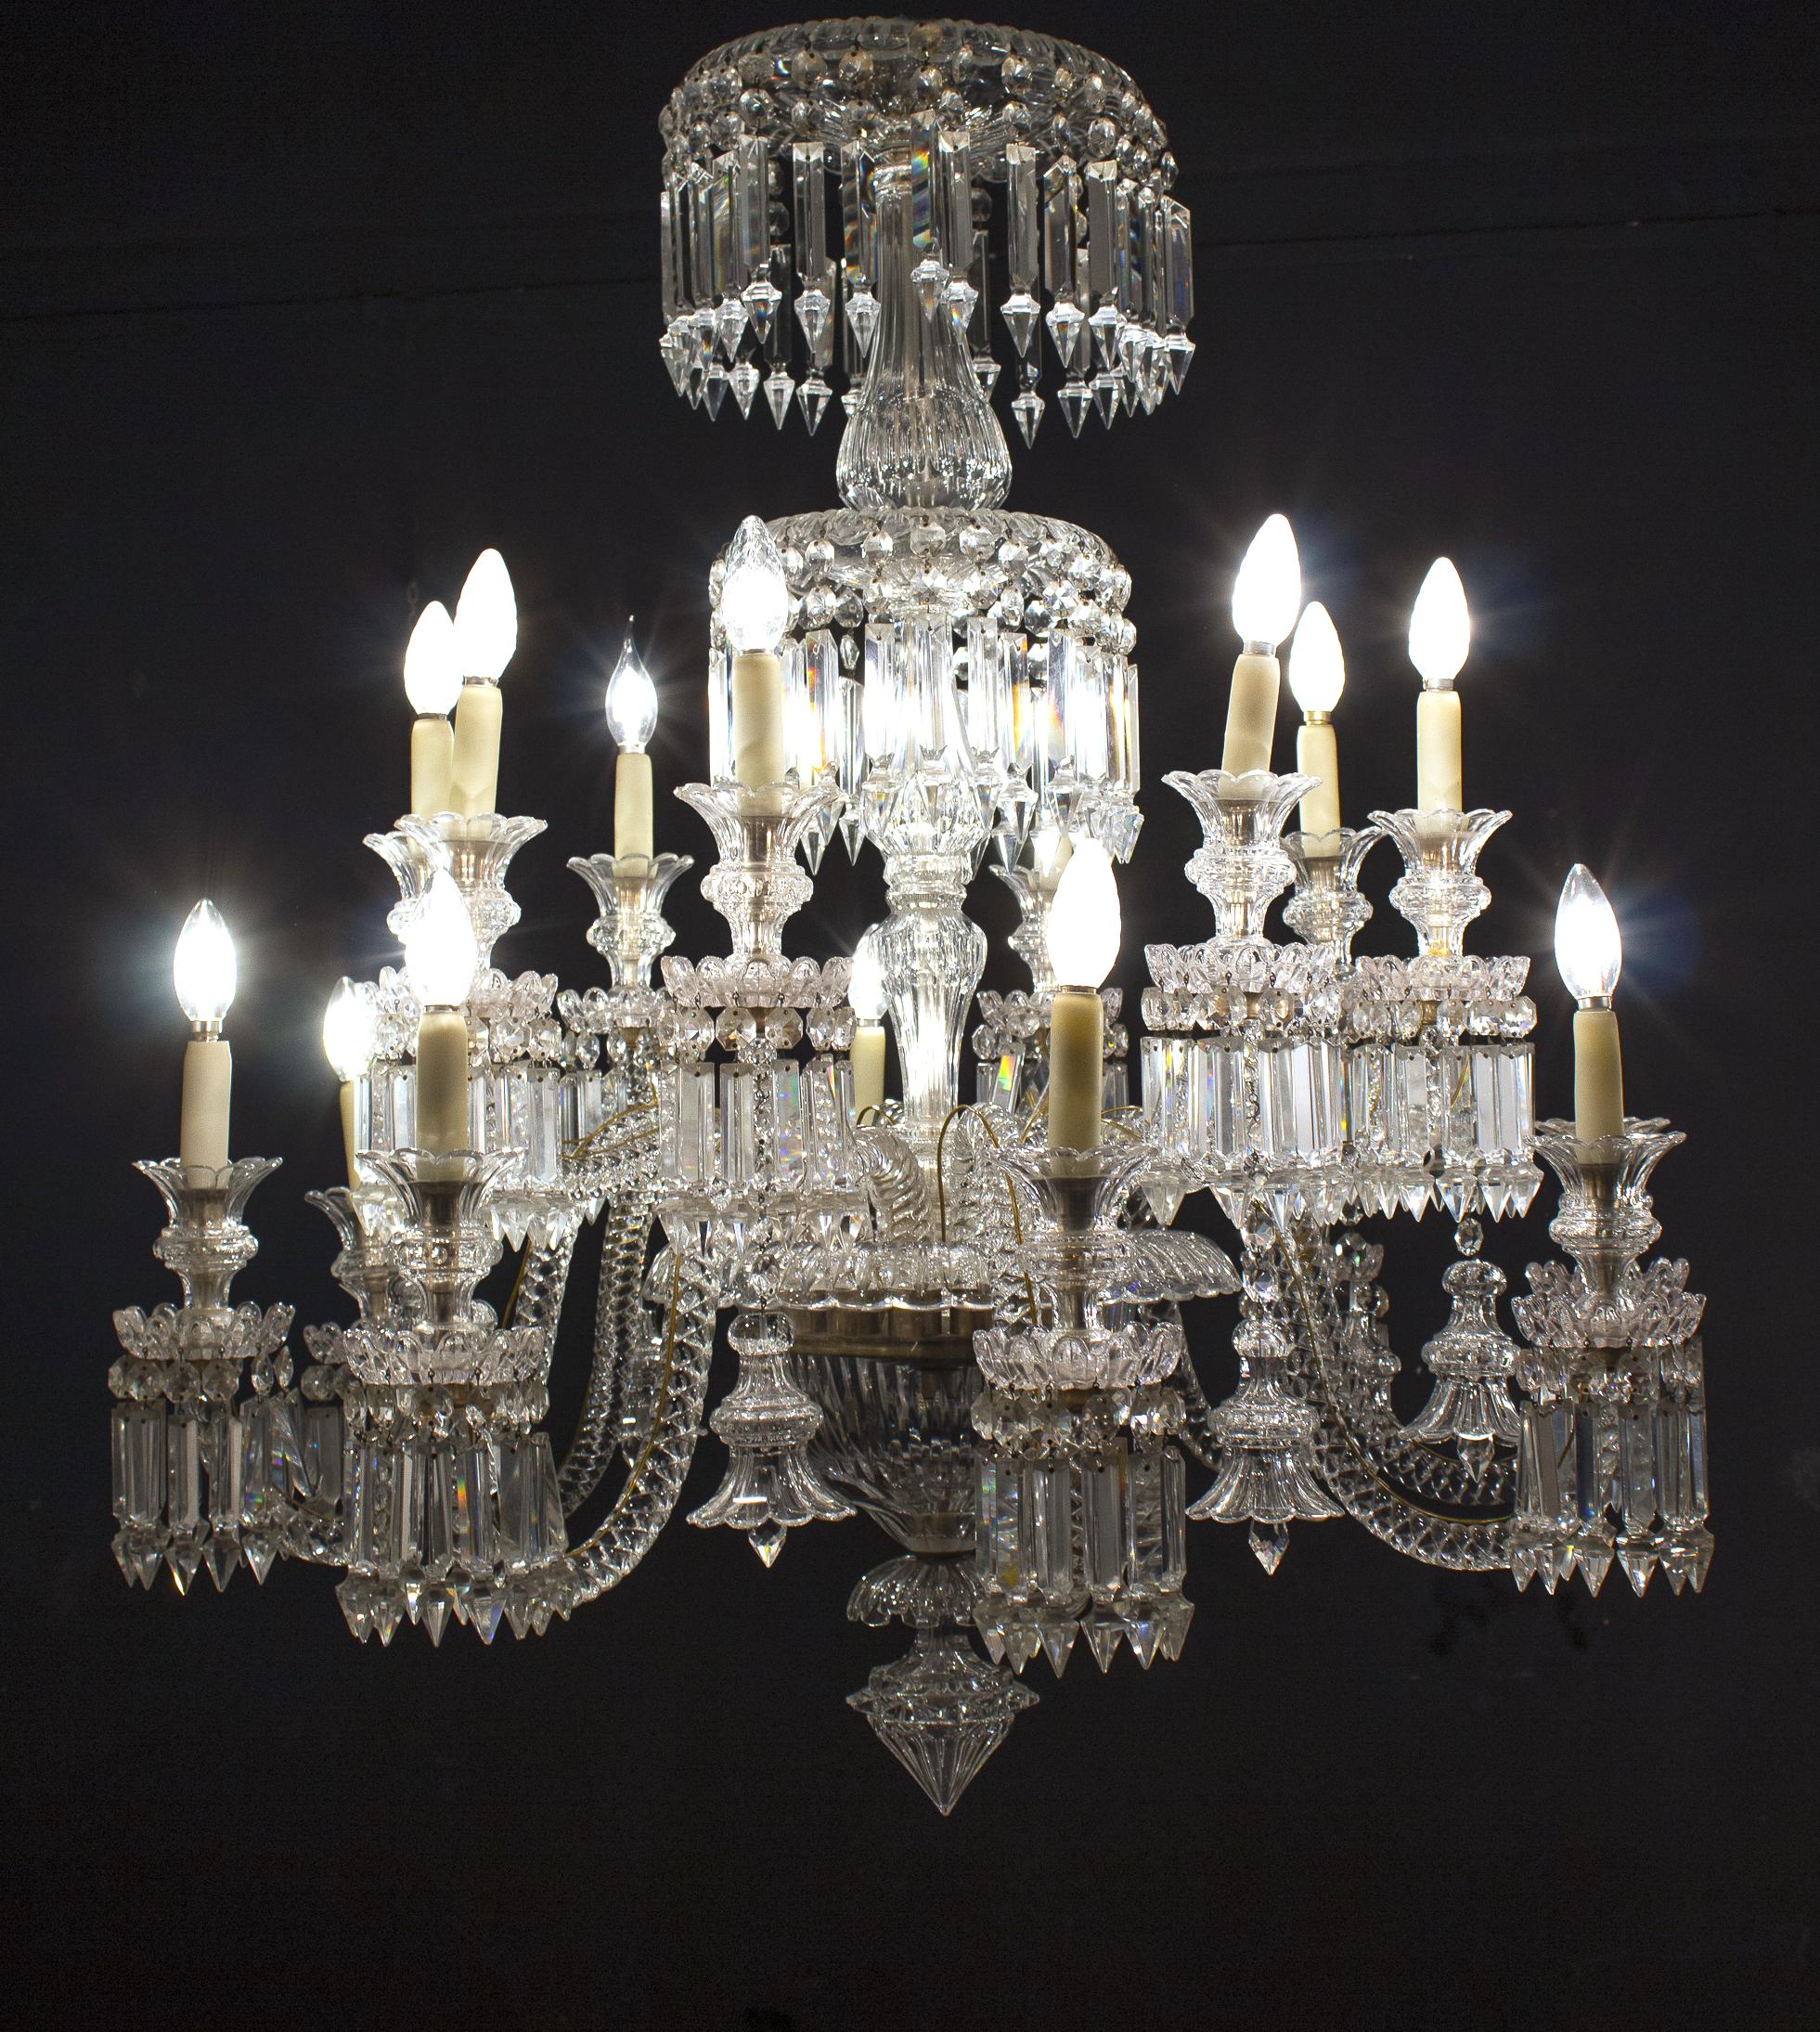 A sixteen-light crystal chandelier in the manner of Baccarat. The 16 lights are on three floors. The crystals are perfectly preserved.
Cleaned and re-wired, in full working order and ready to use. In excellent vintage condition. The crystals, all